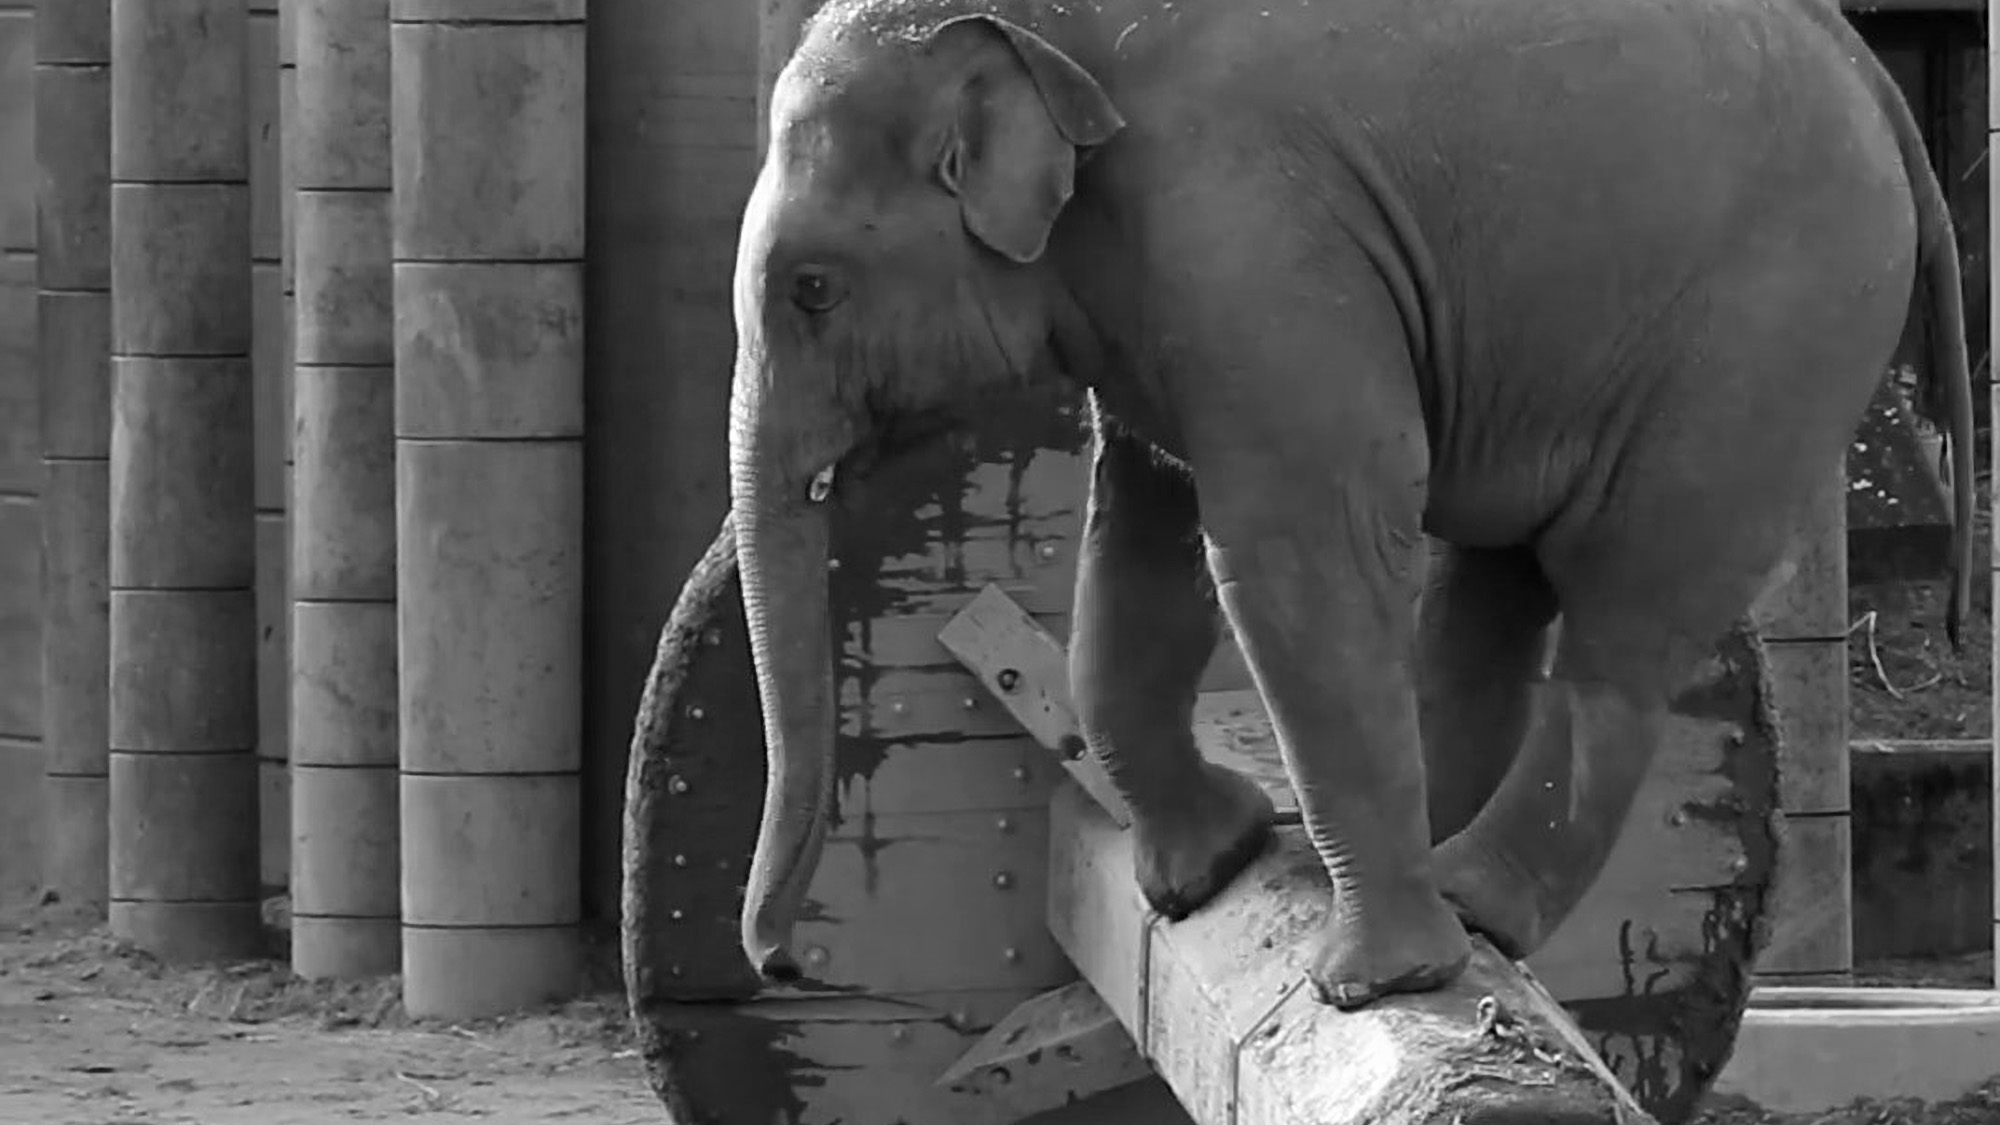 Read more about the article Elephant Does Balancing Act On Top Of Feeder At Zoo